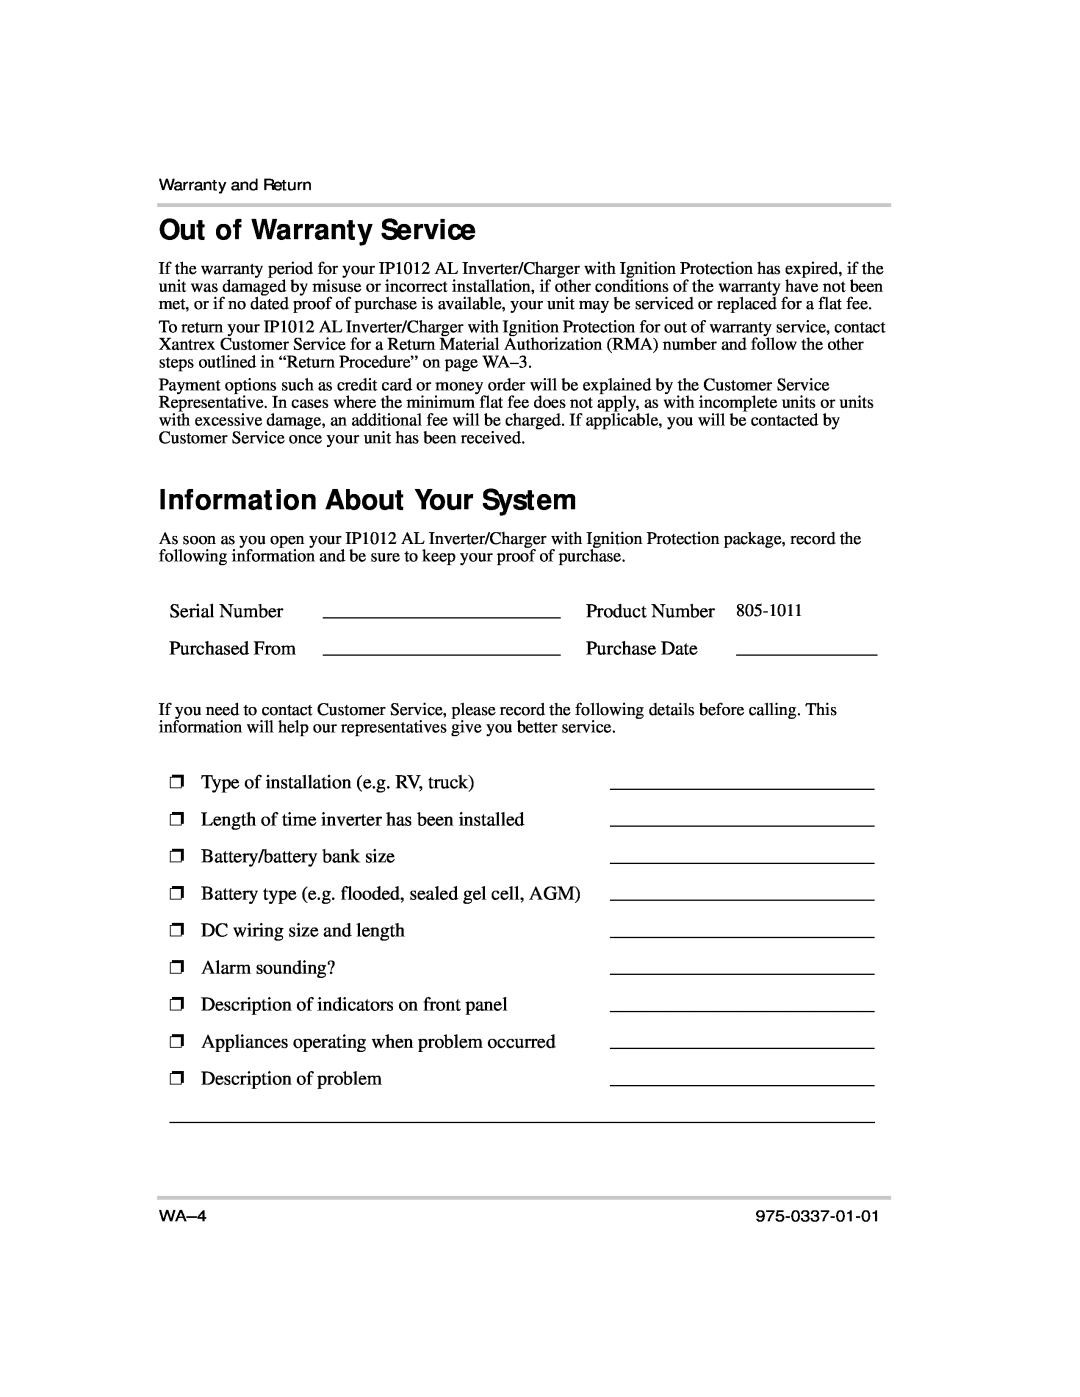 Xantrex Technology IP1012 AL manual Out of Warranty Service, Information About Your System 